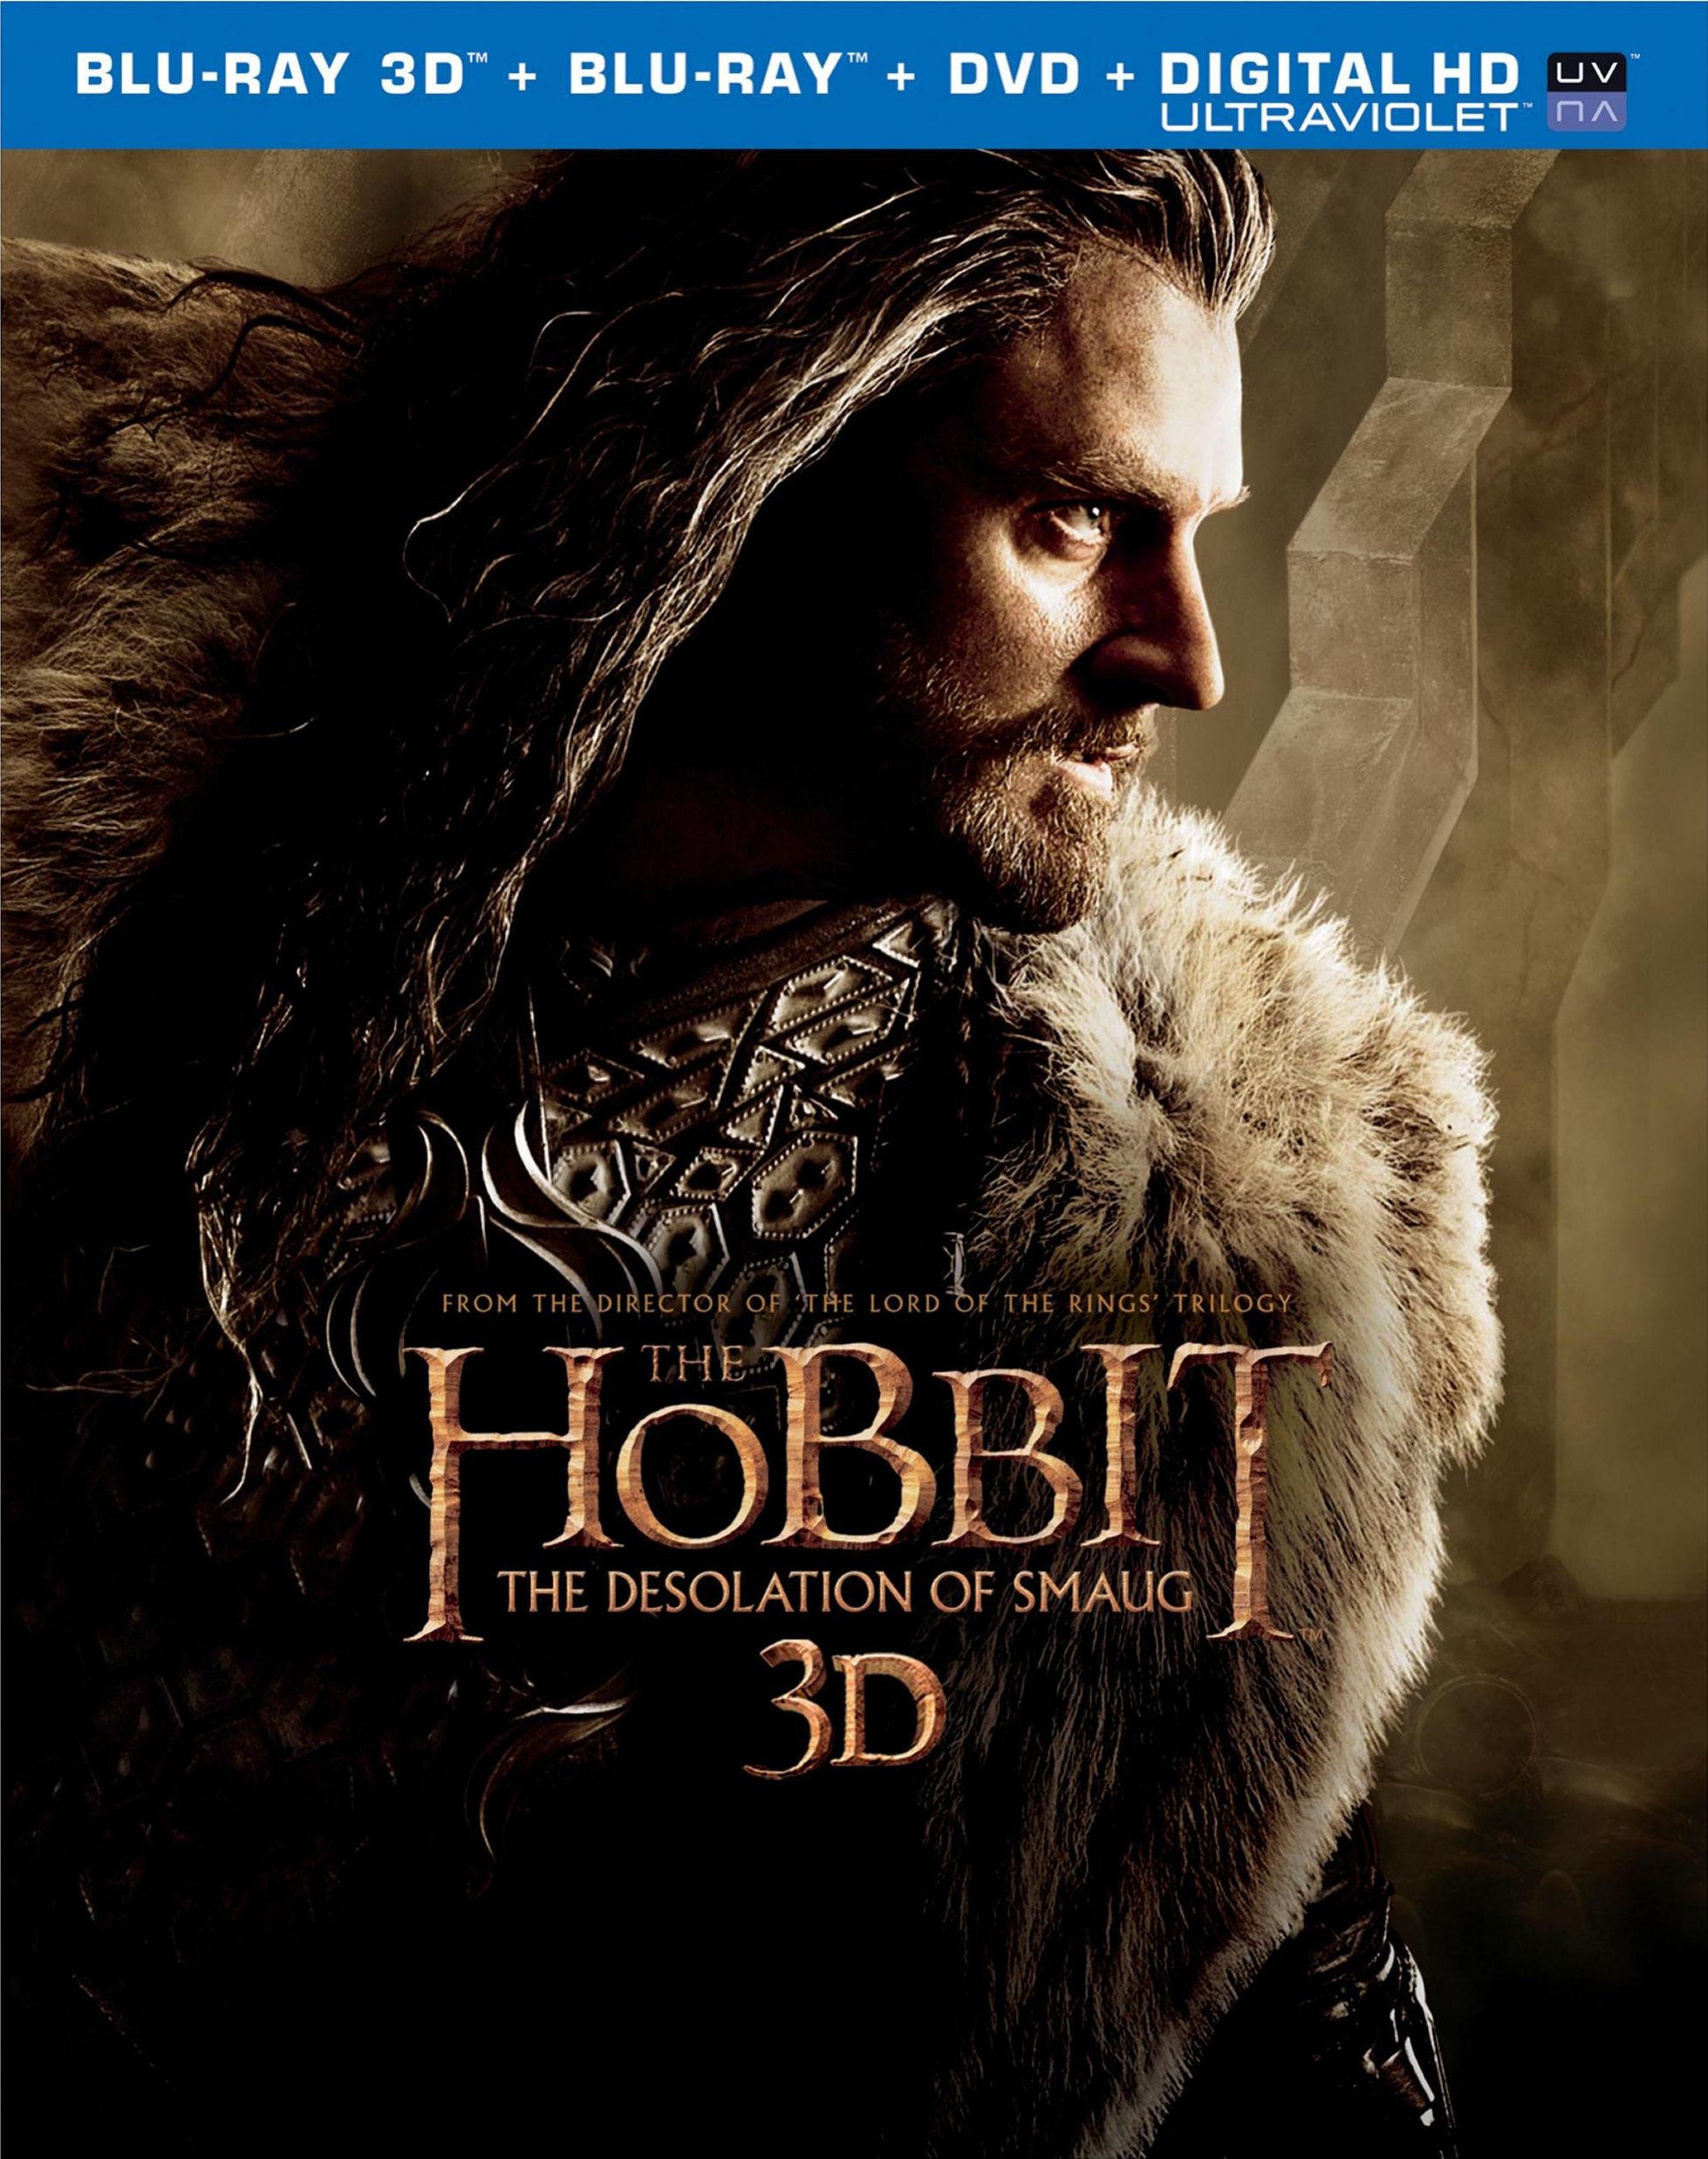 The Hobbit: The Desolation of Smaug - Official Teaser